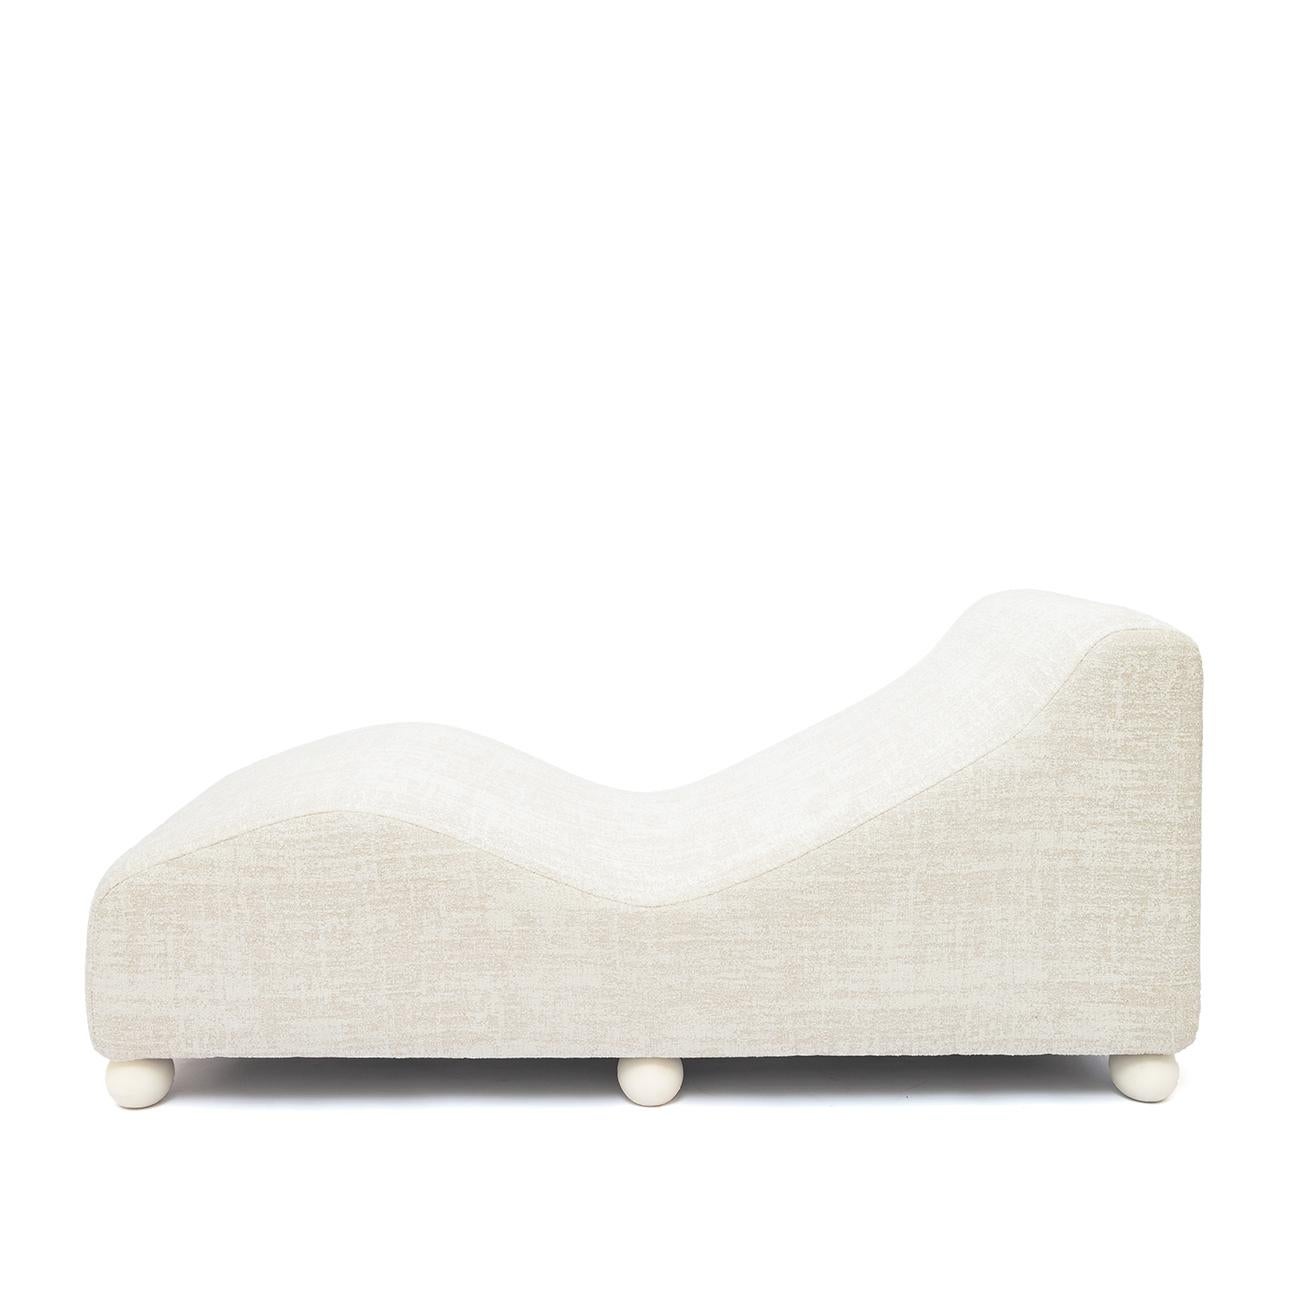 Object 099 Chaise Lounge by NG Design
Dimensions: W 163 x D 71 x H 75 cm
Materials: Rustic Fabric

Also Available: All of objects available in different materials and colors on demand.

Chaise longue with original upholstery, mounted on six